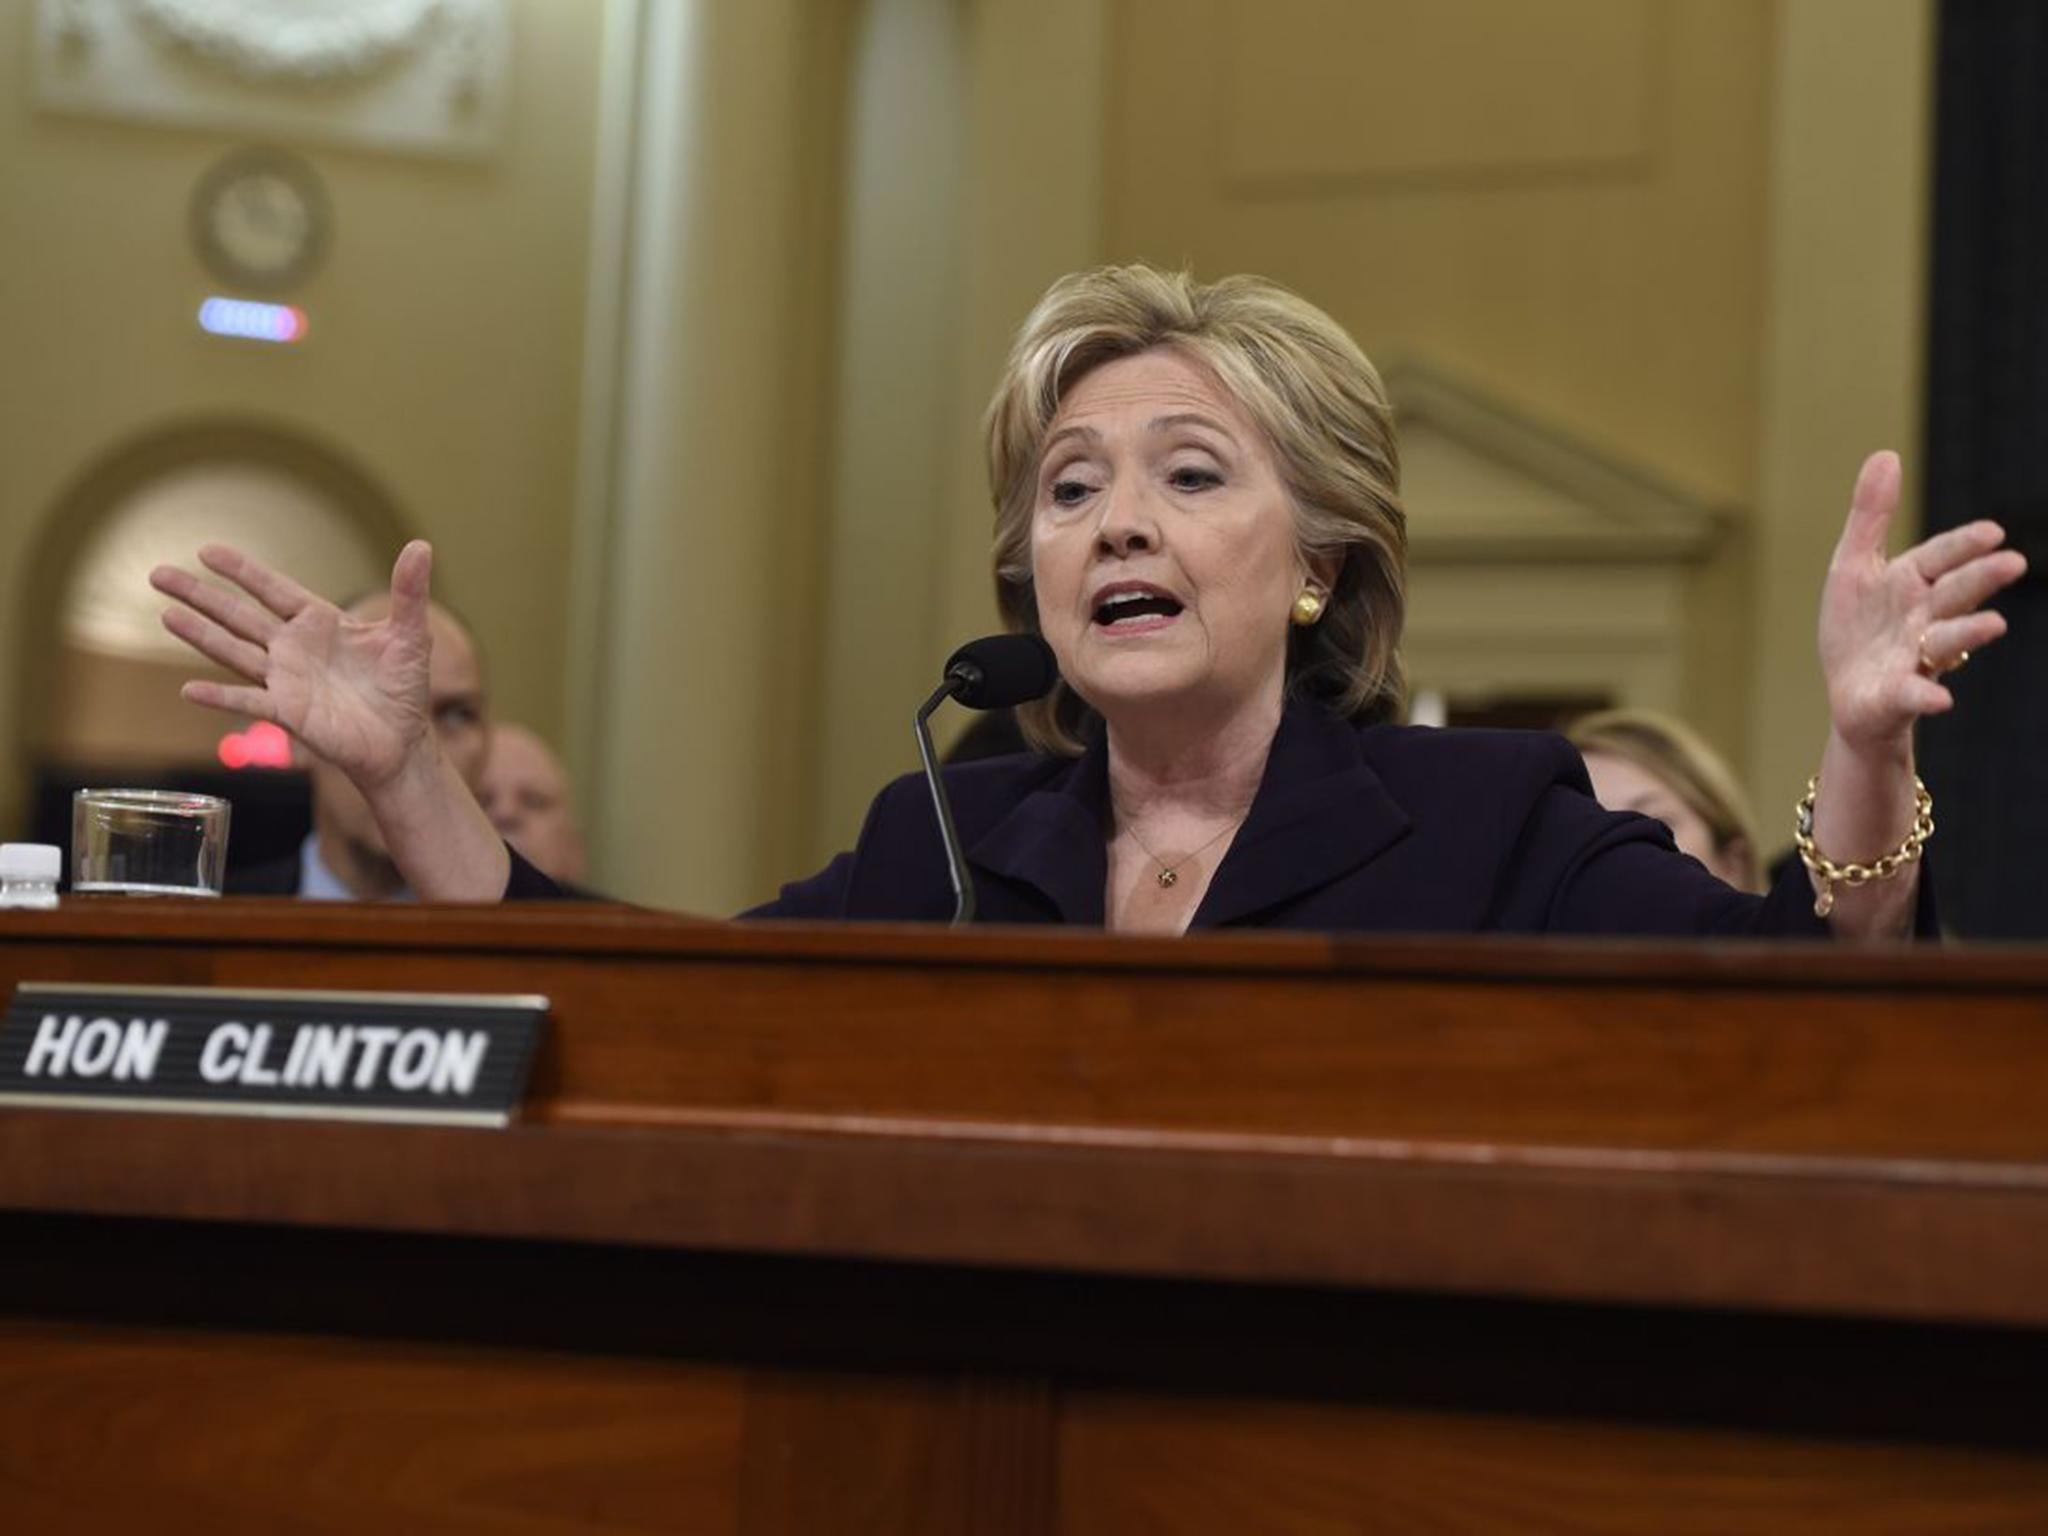 &#13;
Hillary Clinton gave answers but also looked bored at times in front of the select committee on Benghazi earlier this week &#13;